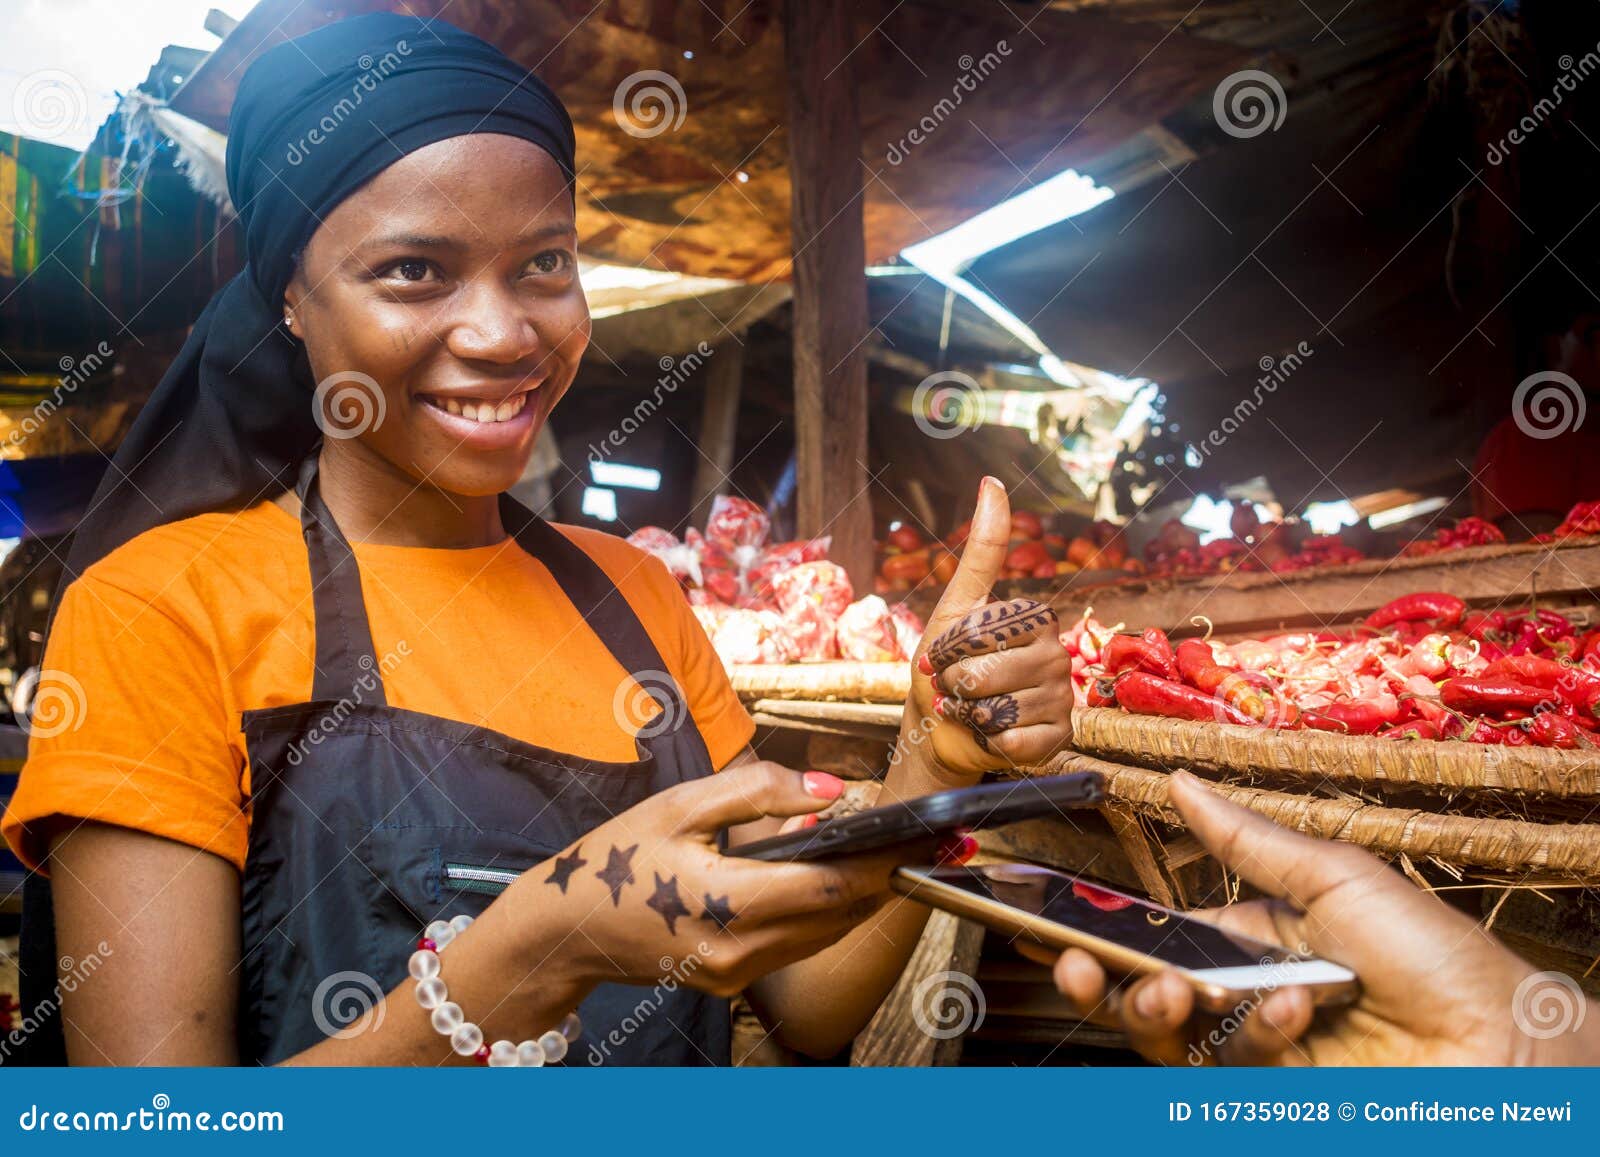 pretty young black woman selling tomatoes in a local african market receiving payment via mobile phone transfer giving a thumbs up